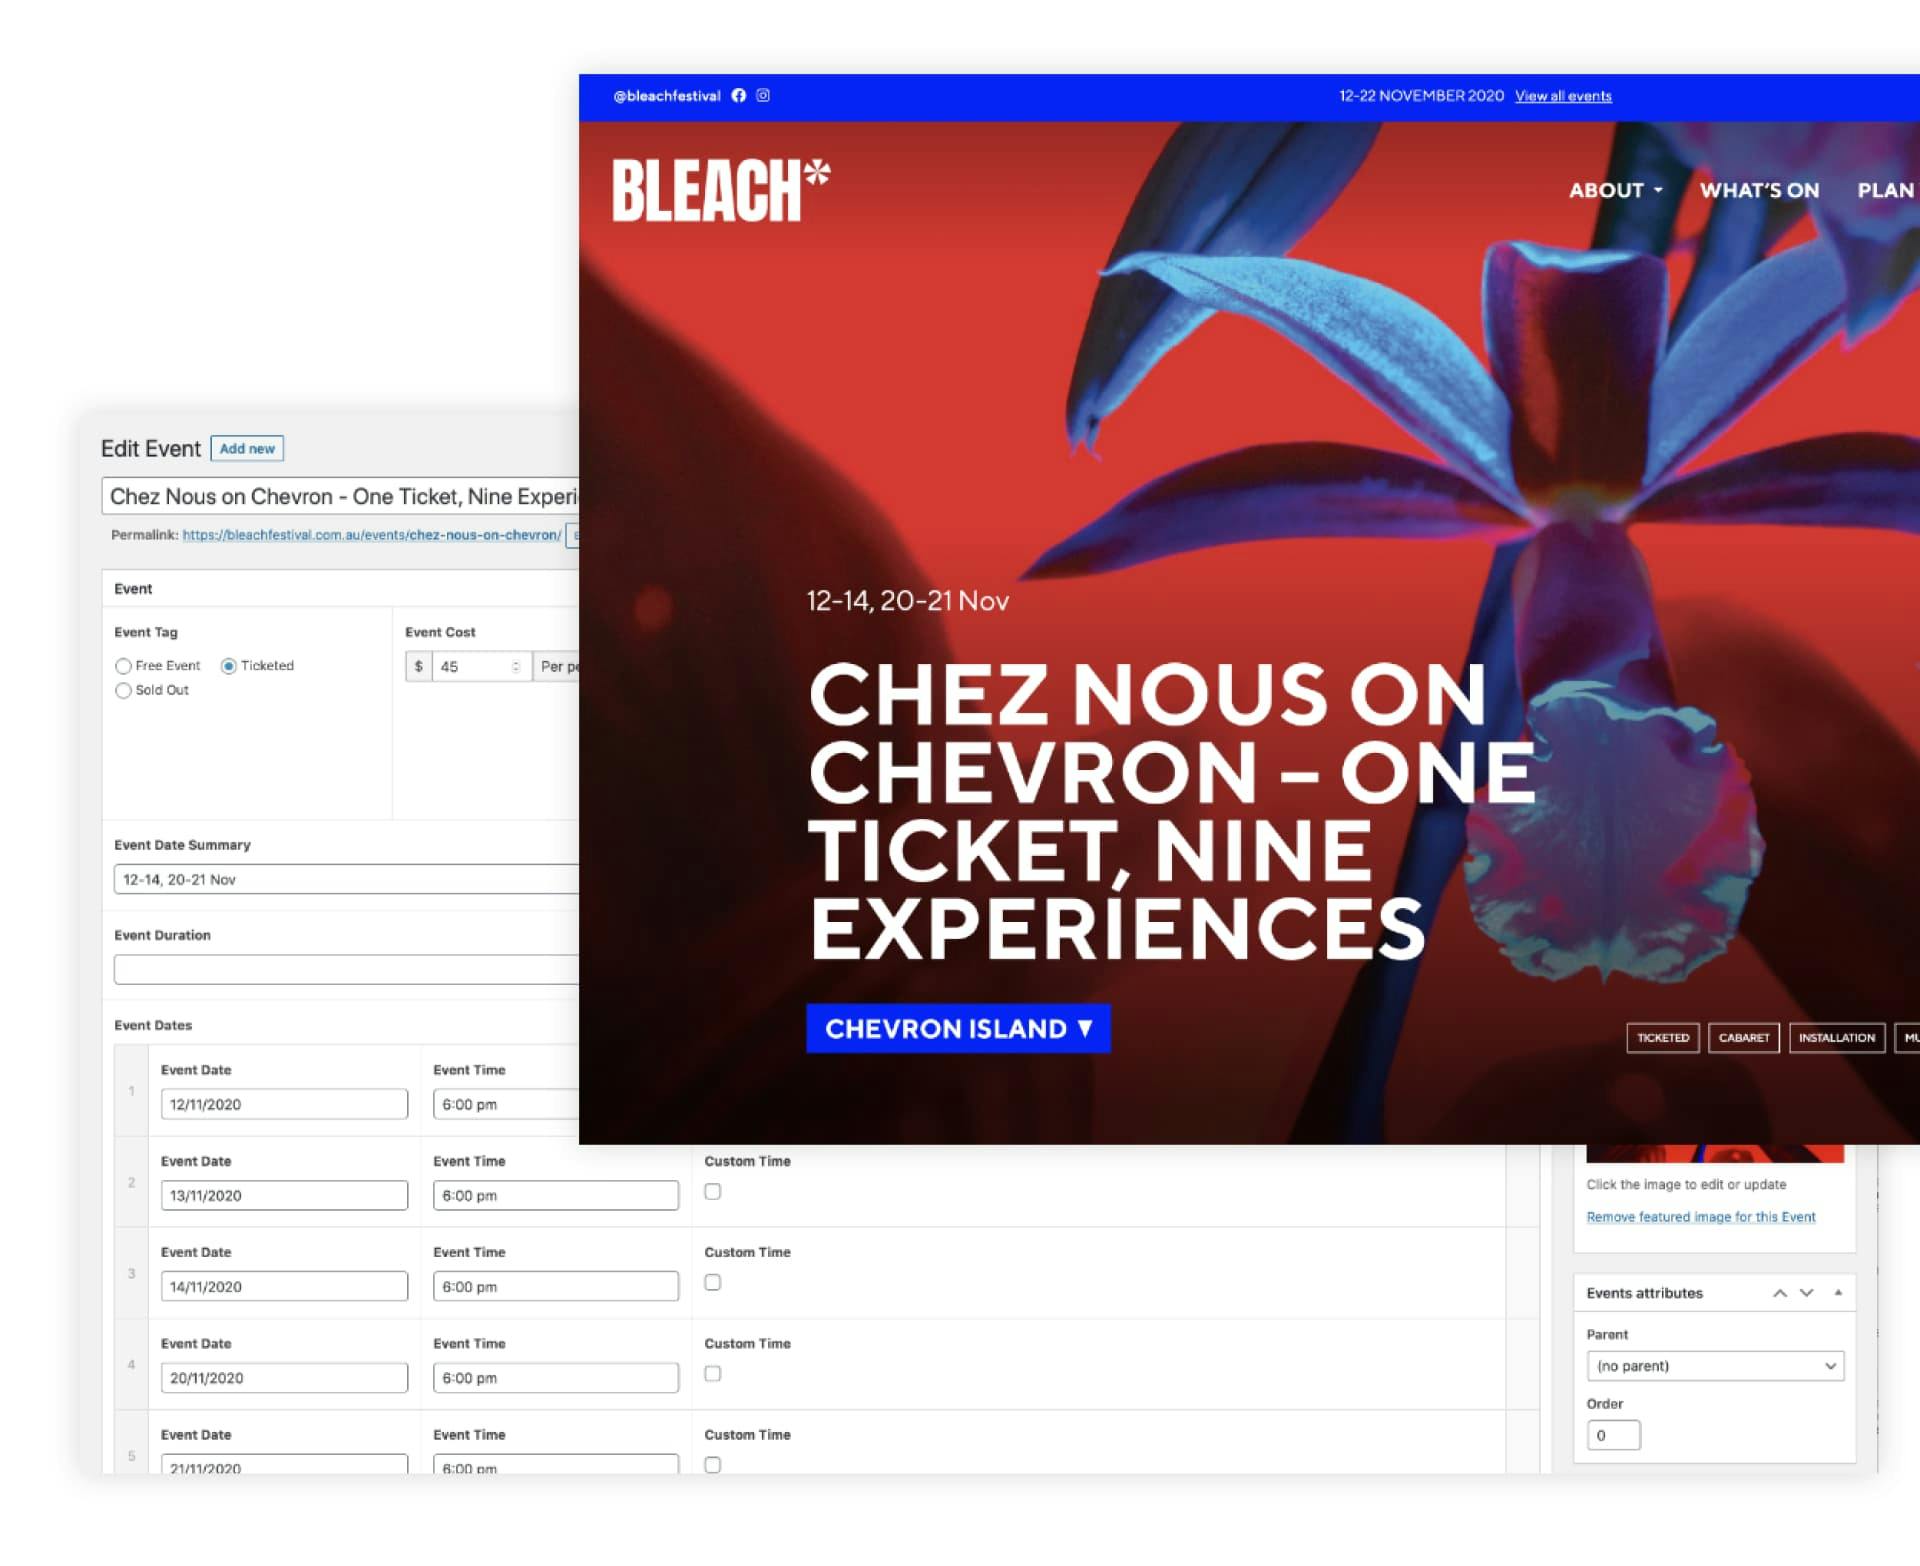 Bleach* Festival website. Showcasing backend and frontend setup